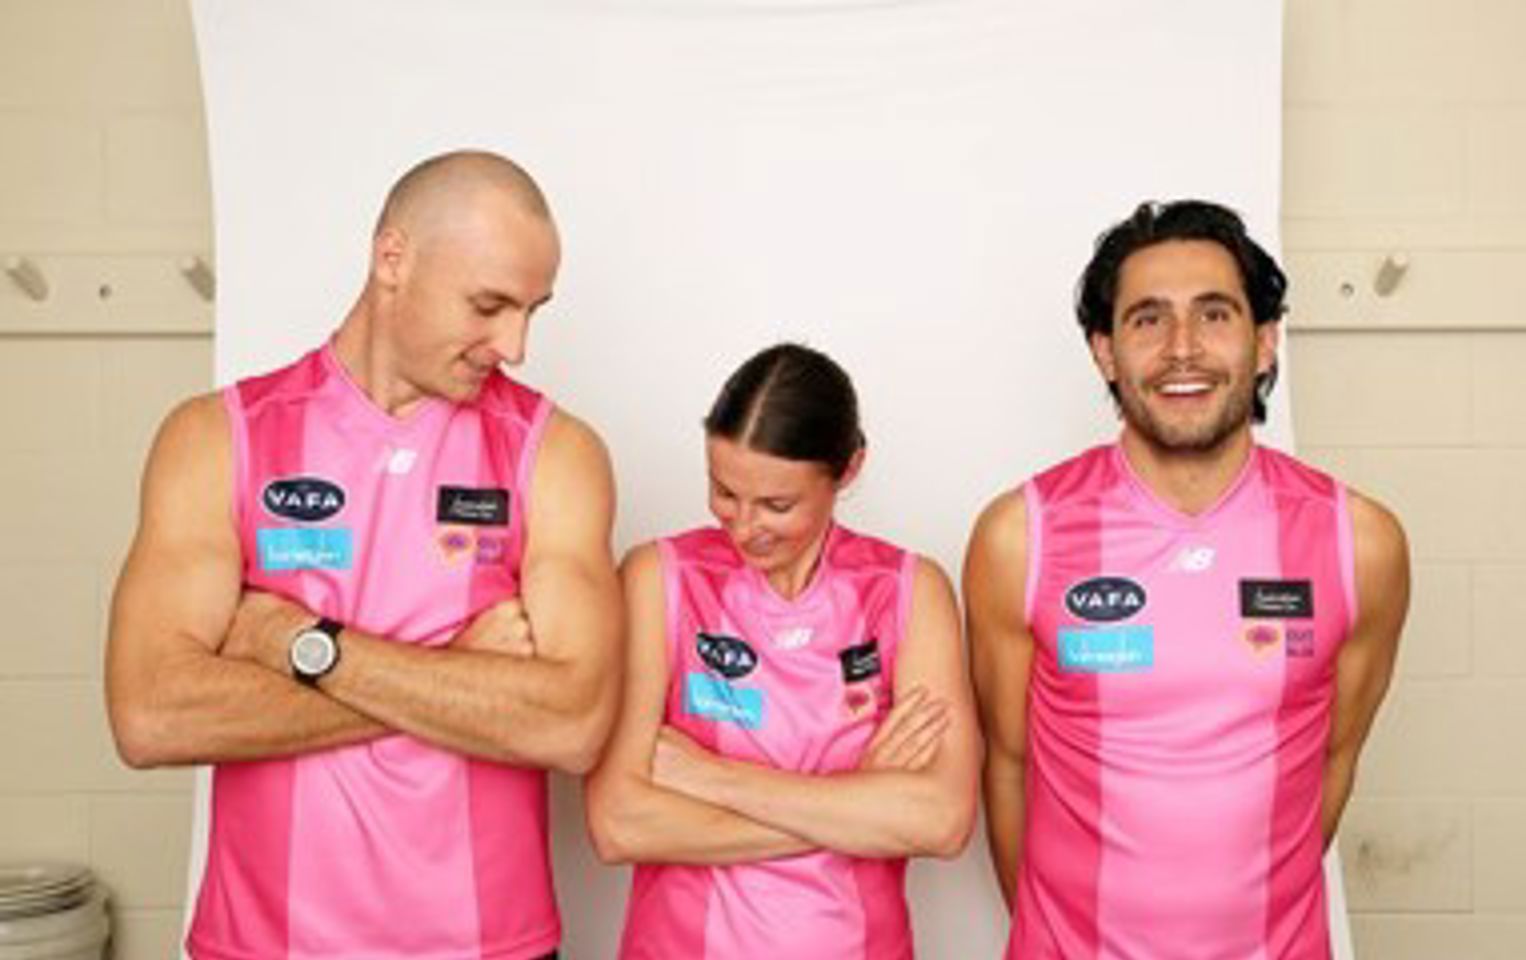 Three football players in pink